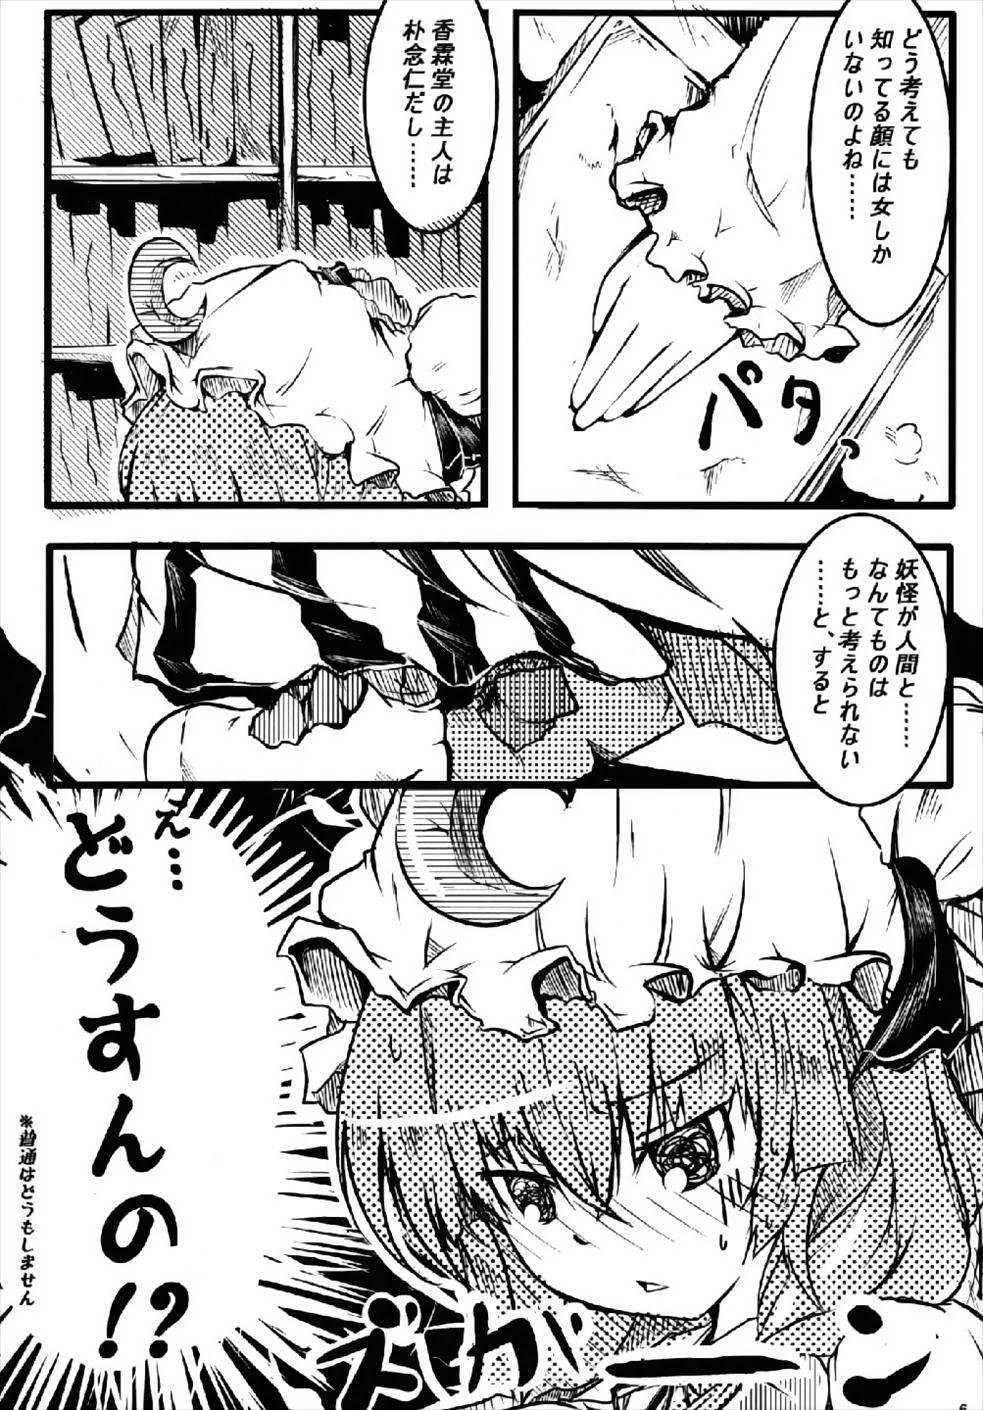 Hard Core Porn RemiFlaPatche! - Touhou project Gay Party - Page 5